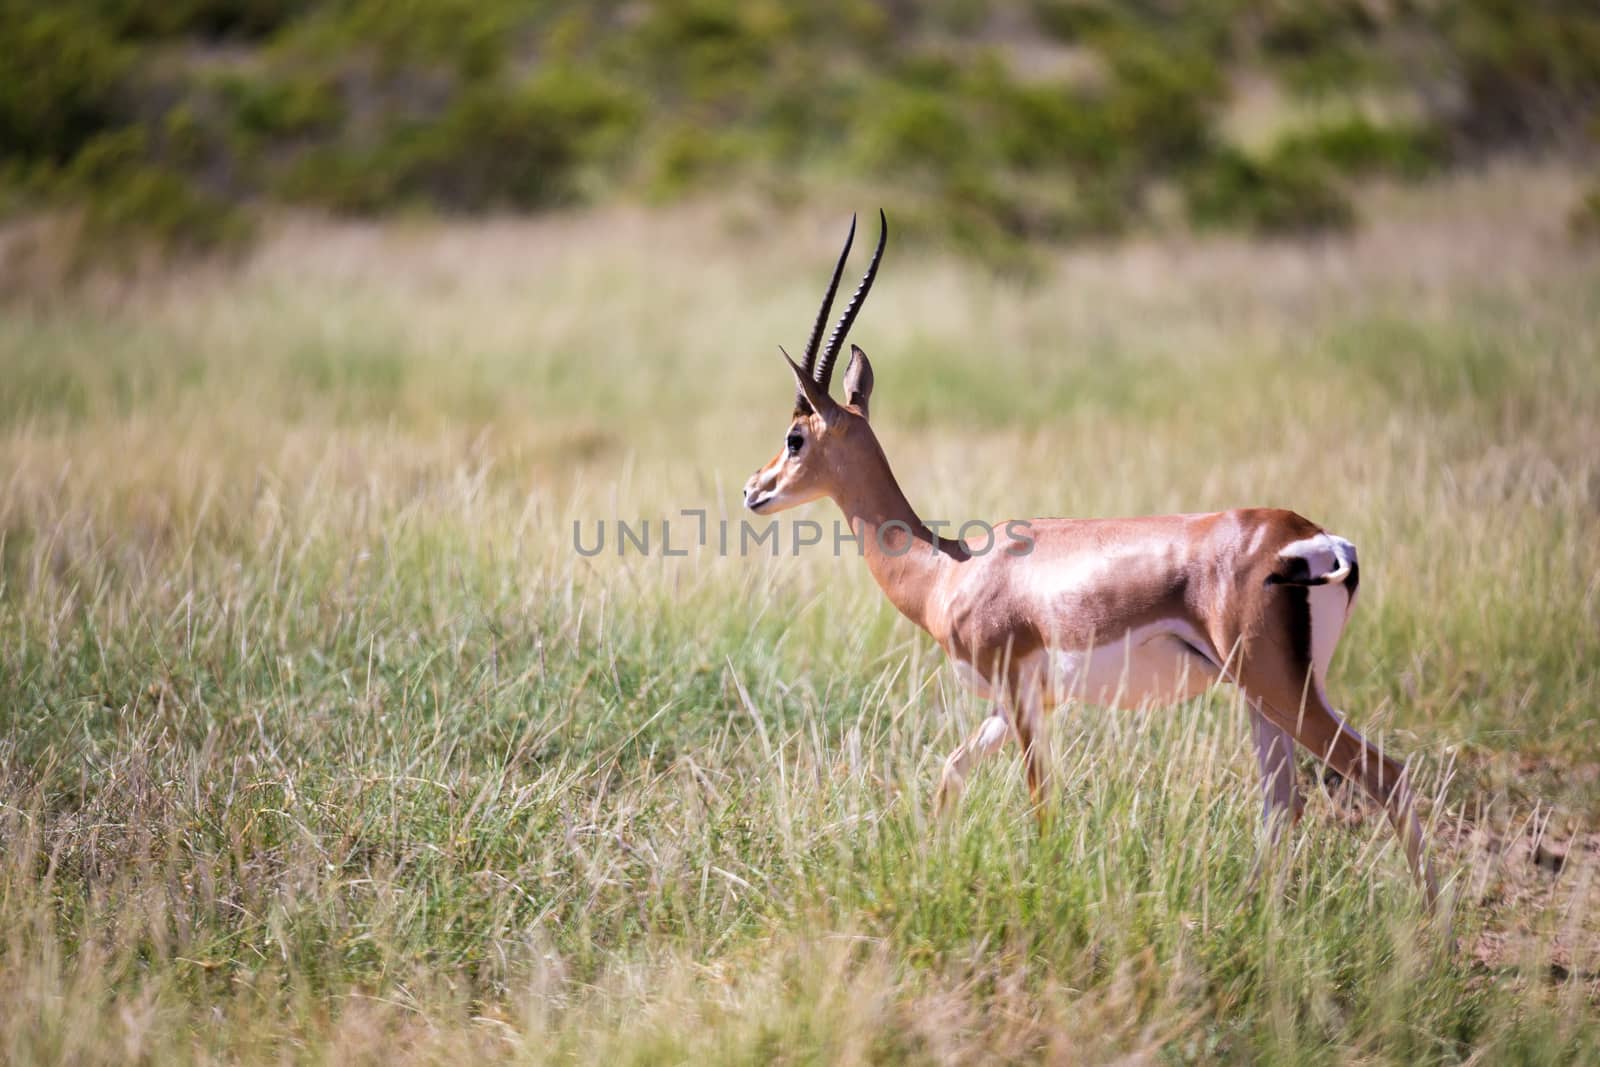 Some antelopes in the grass landscape of Kenya by 25ehaag6